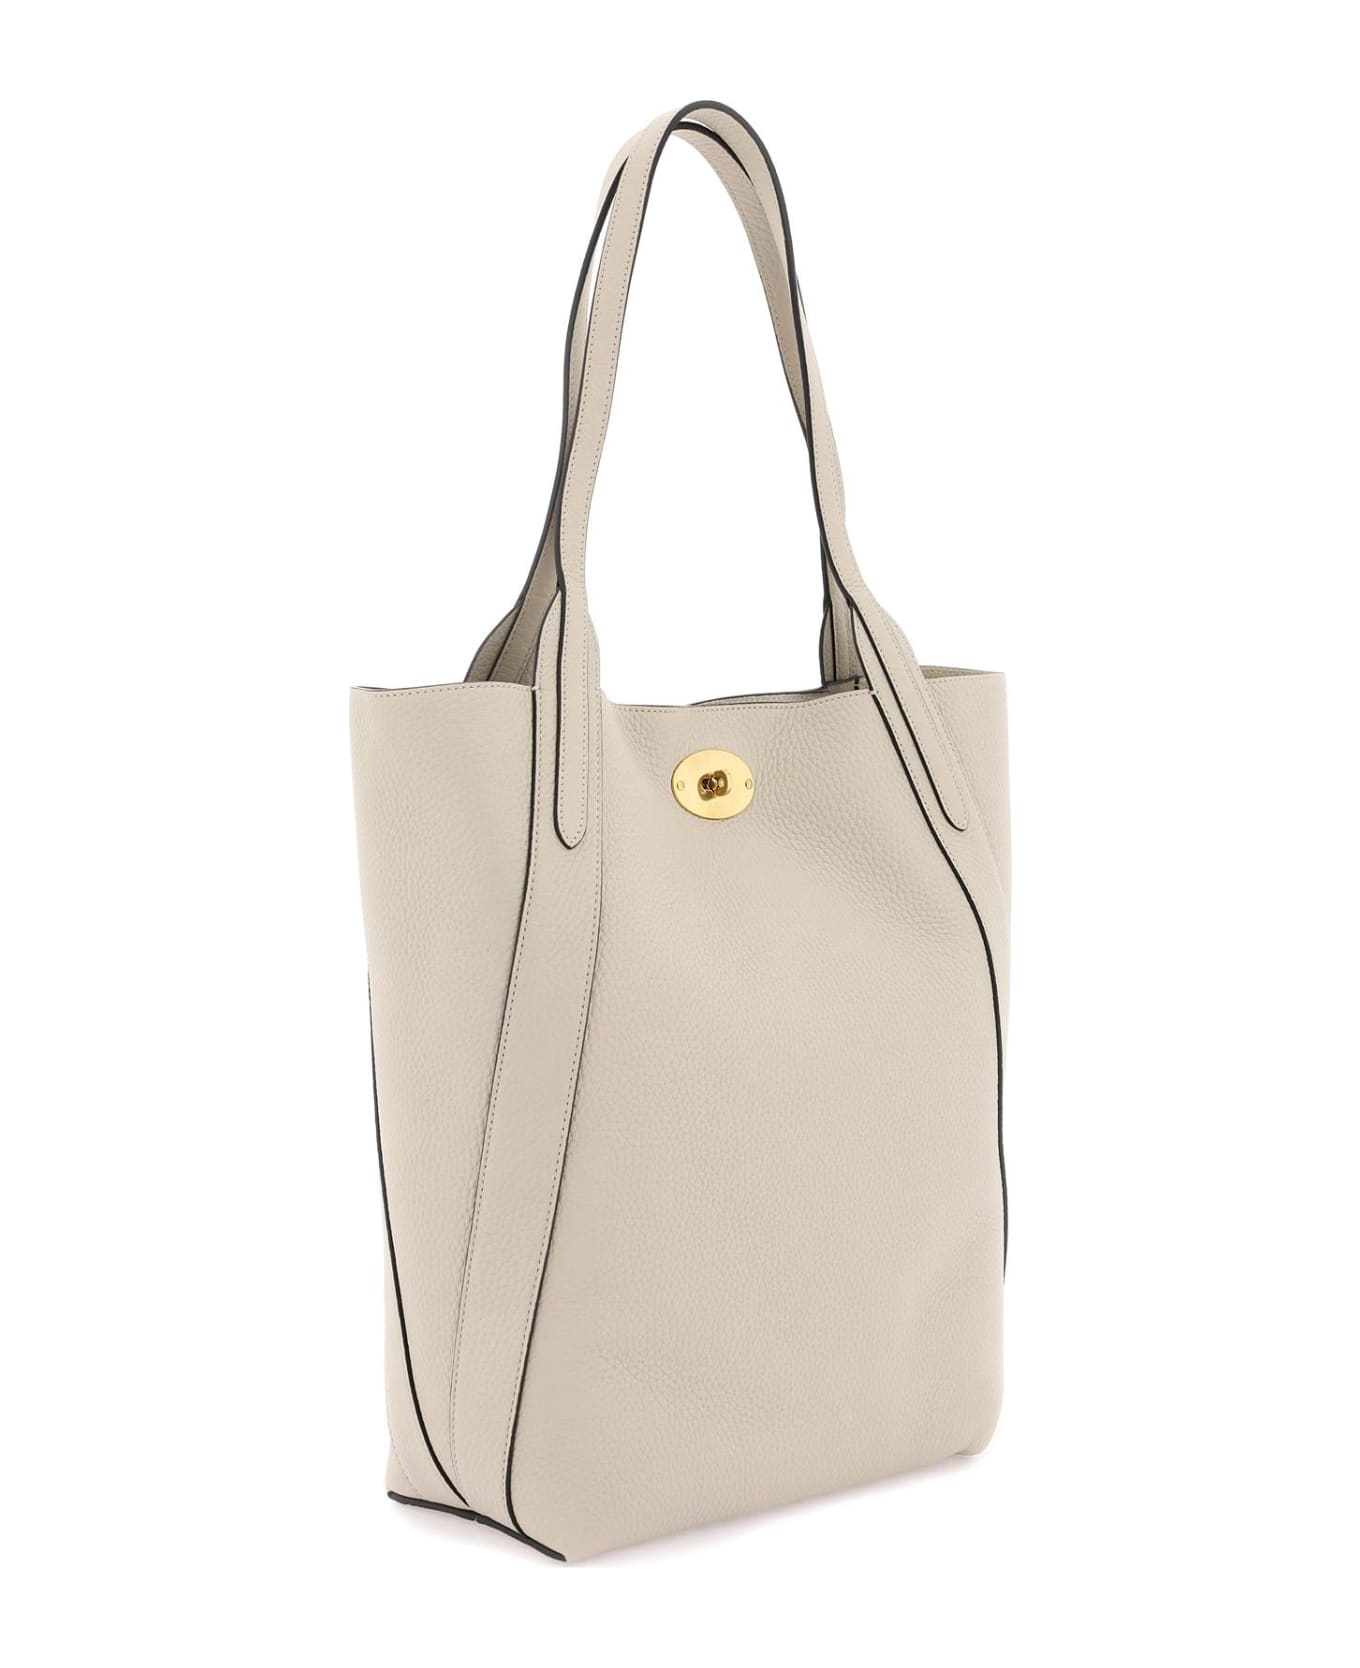 Mulberry Grained Leather Bayswater Tote Bag - CHALK トートバッグ